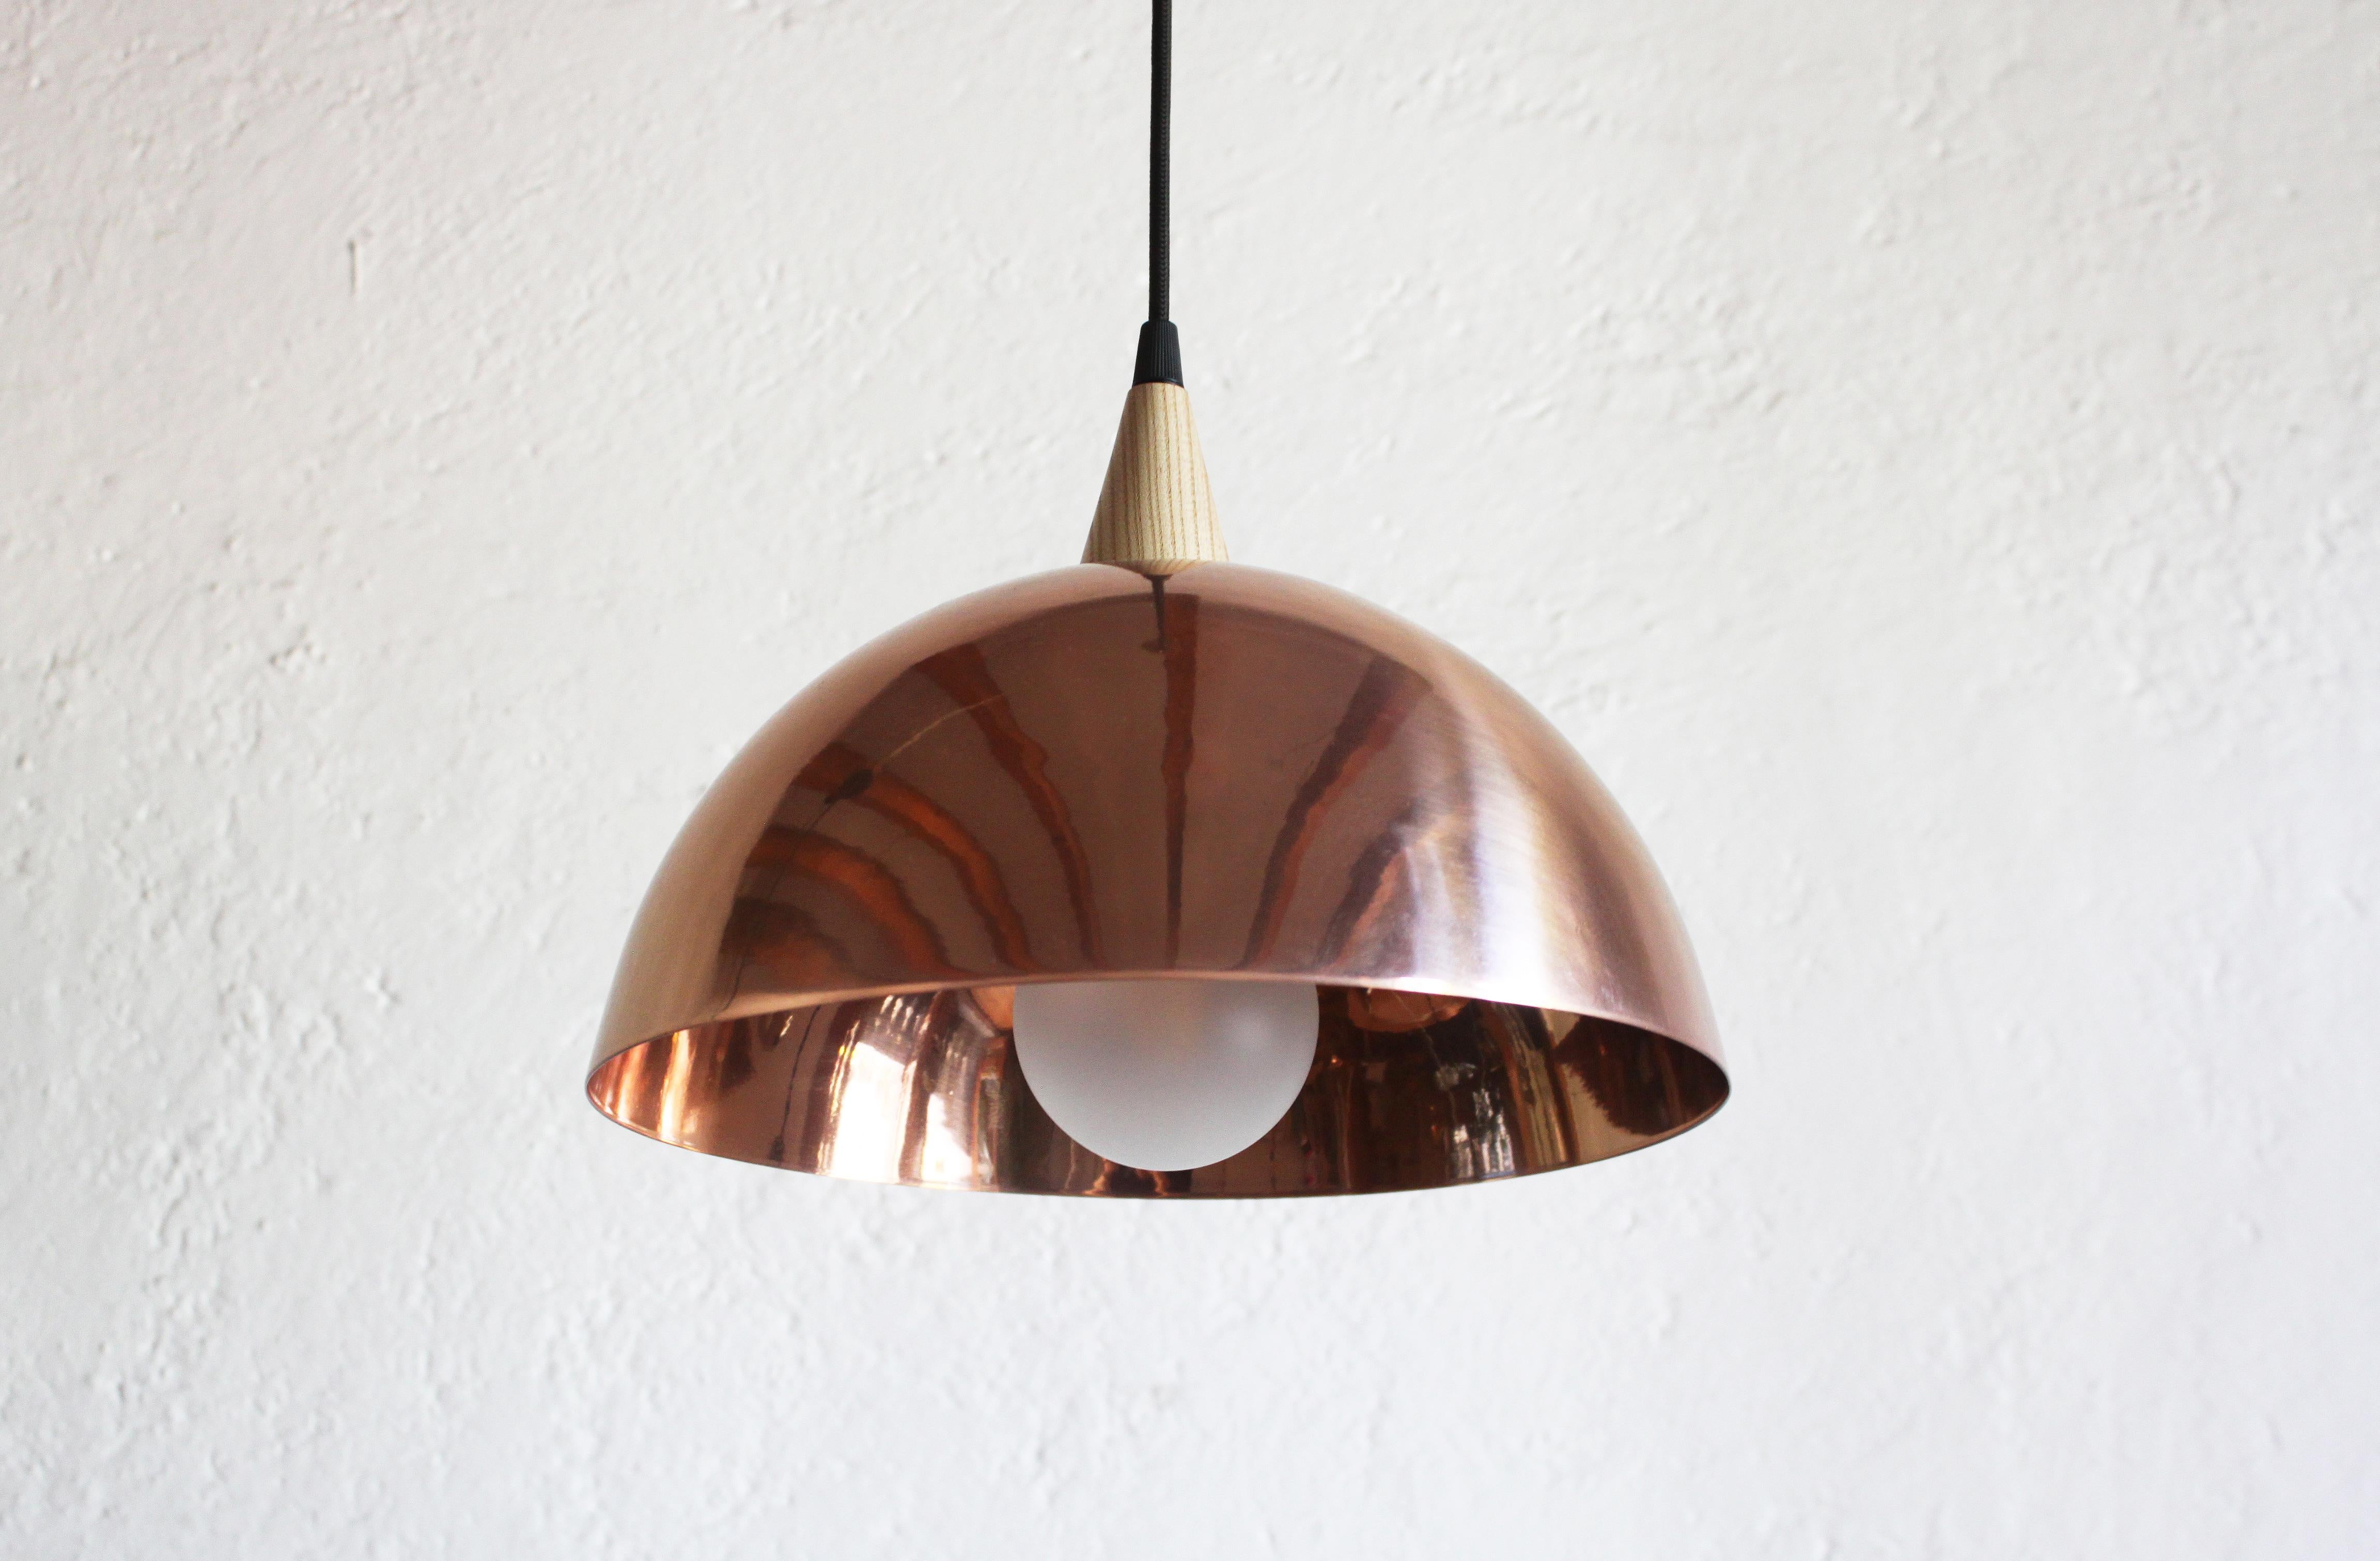 Mexican Domo Abajo 60 Pendant Lamp, Maria Beckmann, Represented by Tuleste Factory For Sale